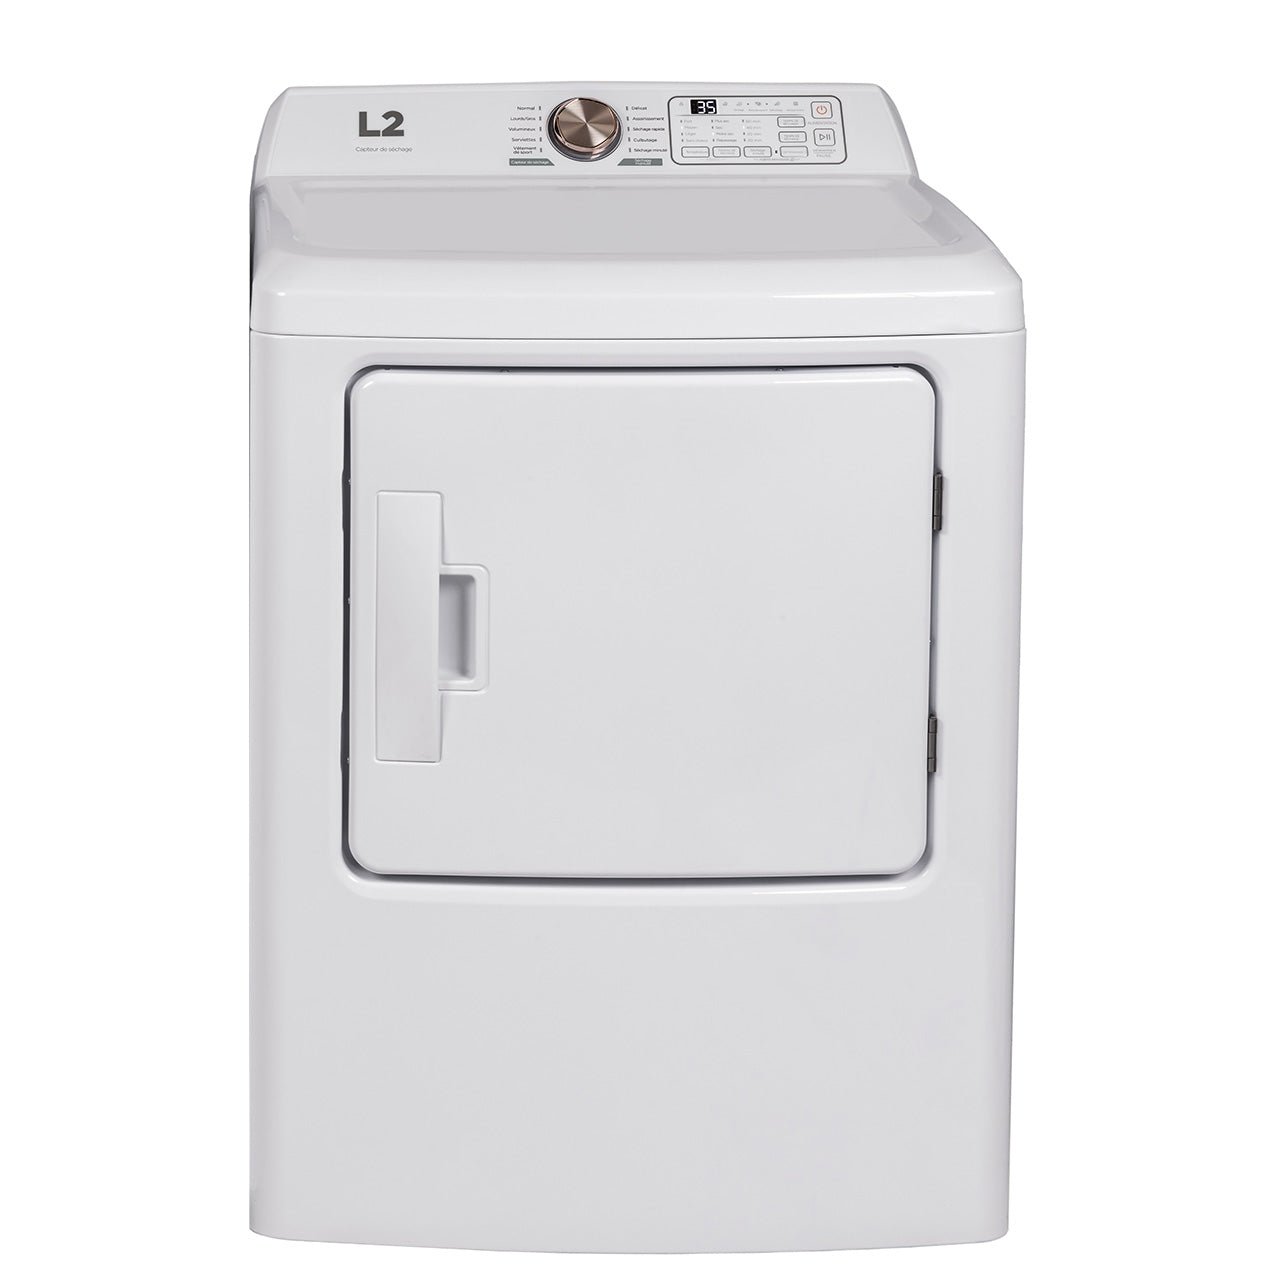 L2 White Electric Dryer with French Display (6.7 Cu. Ft) - LE43A3AWWFR